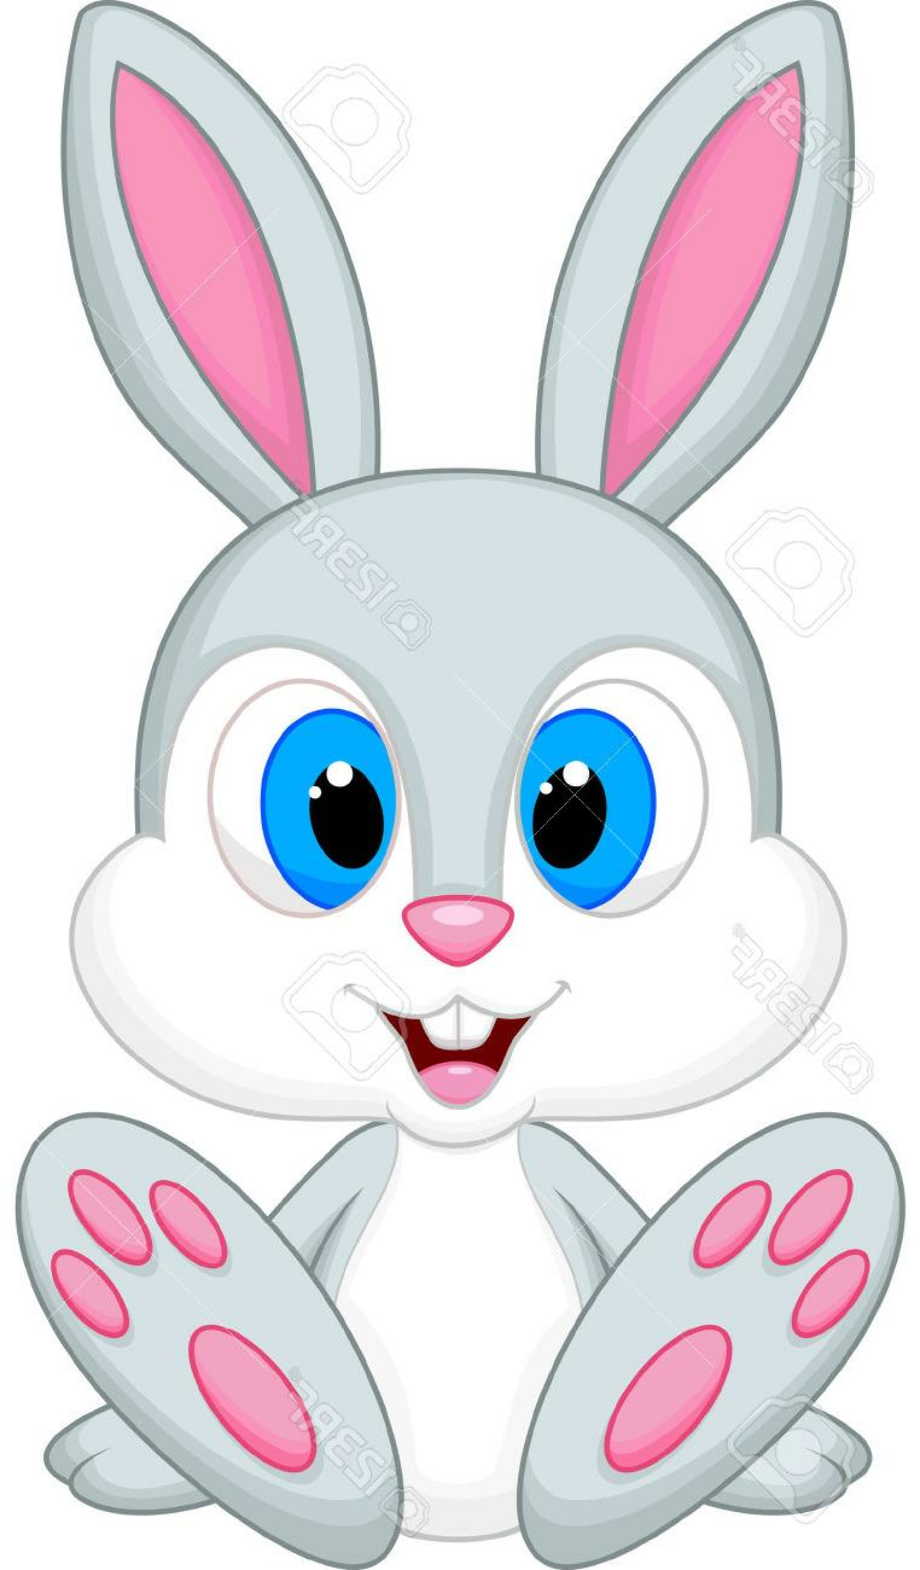 Download High Quality bunny clipart baby Transparent PNG Images - Art